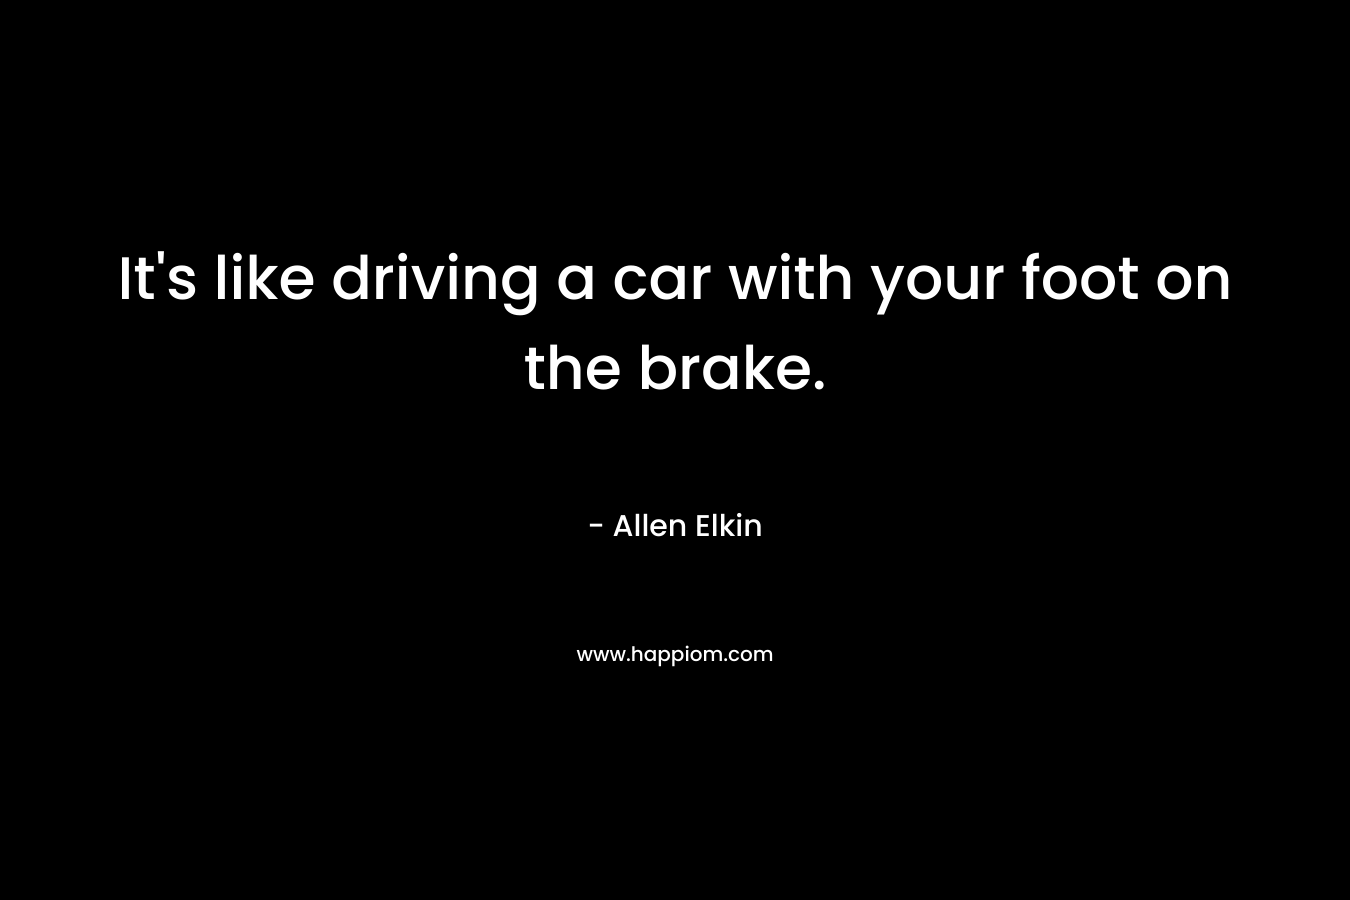 It’s like driving a car with your foot on the brake. – Allen Elkin